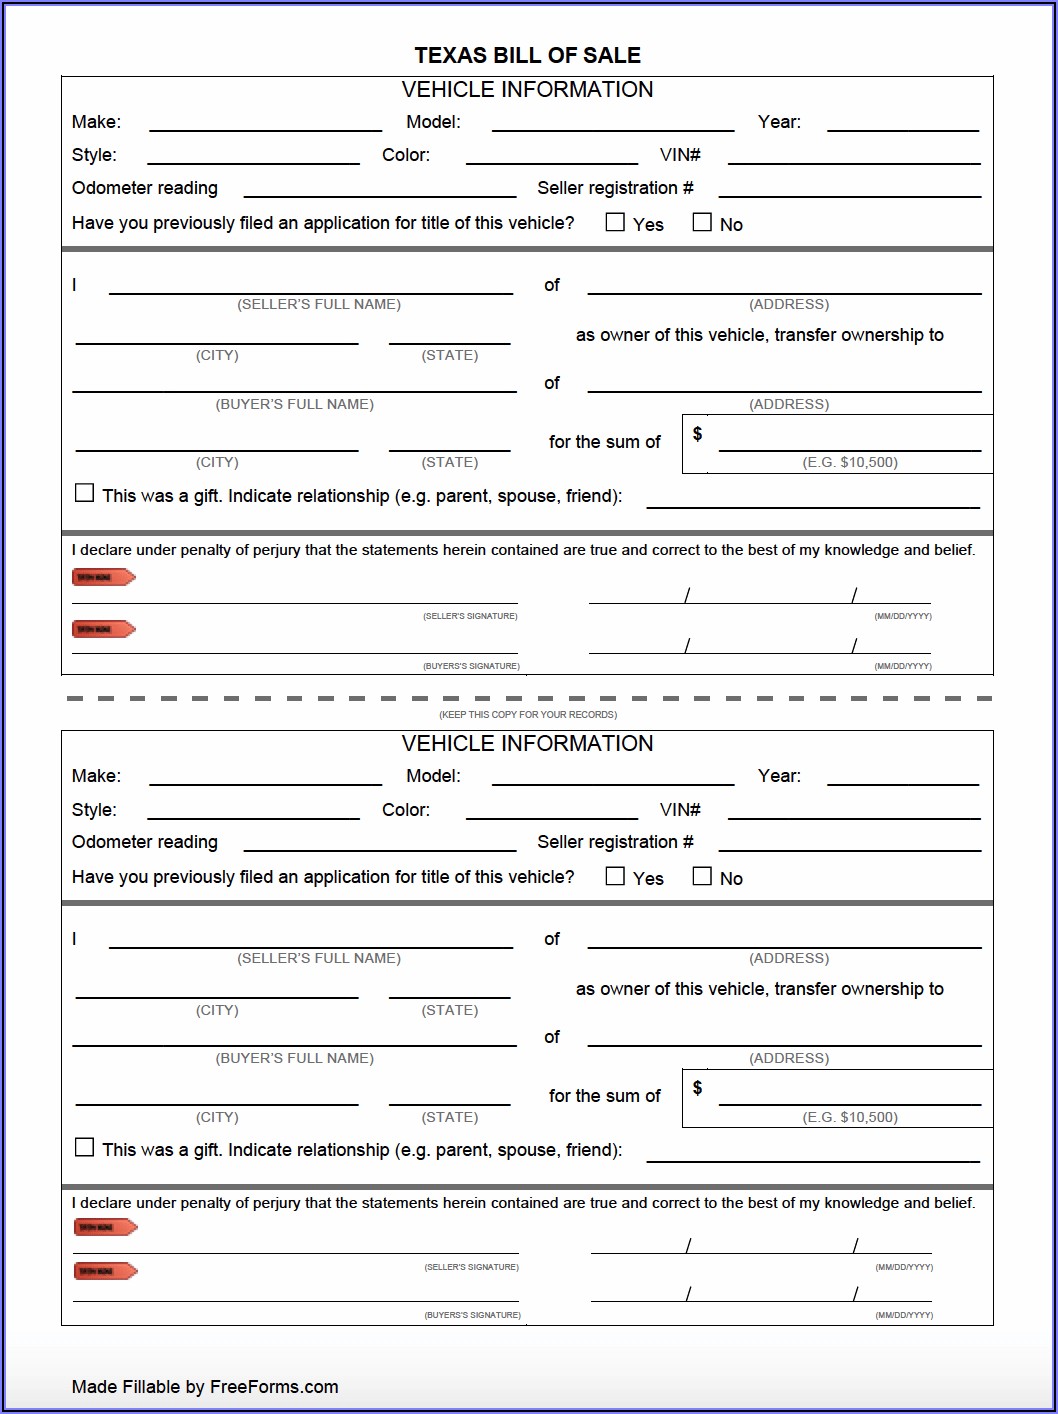 Blank Bill Of Sale Form For Car In Texas